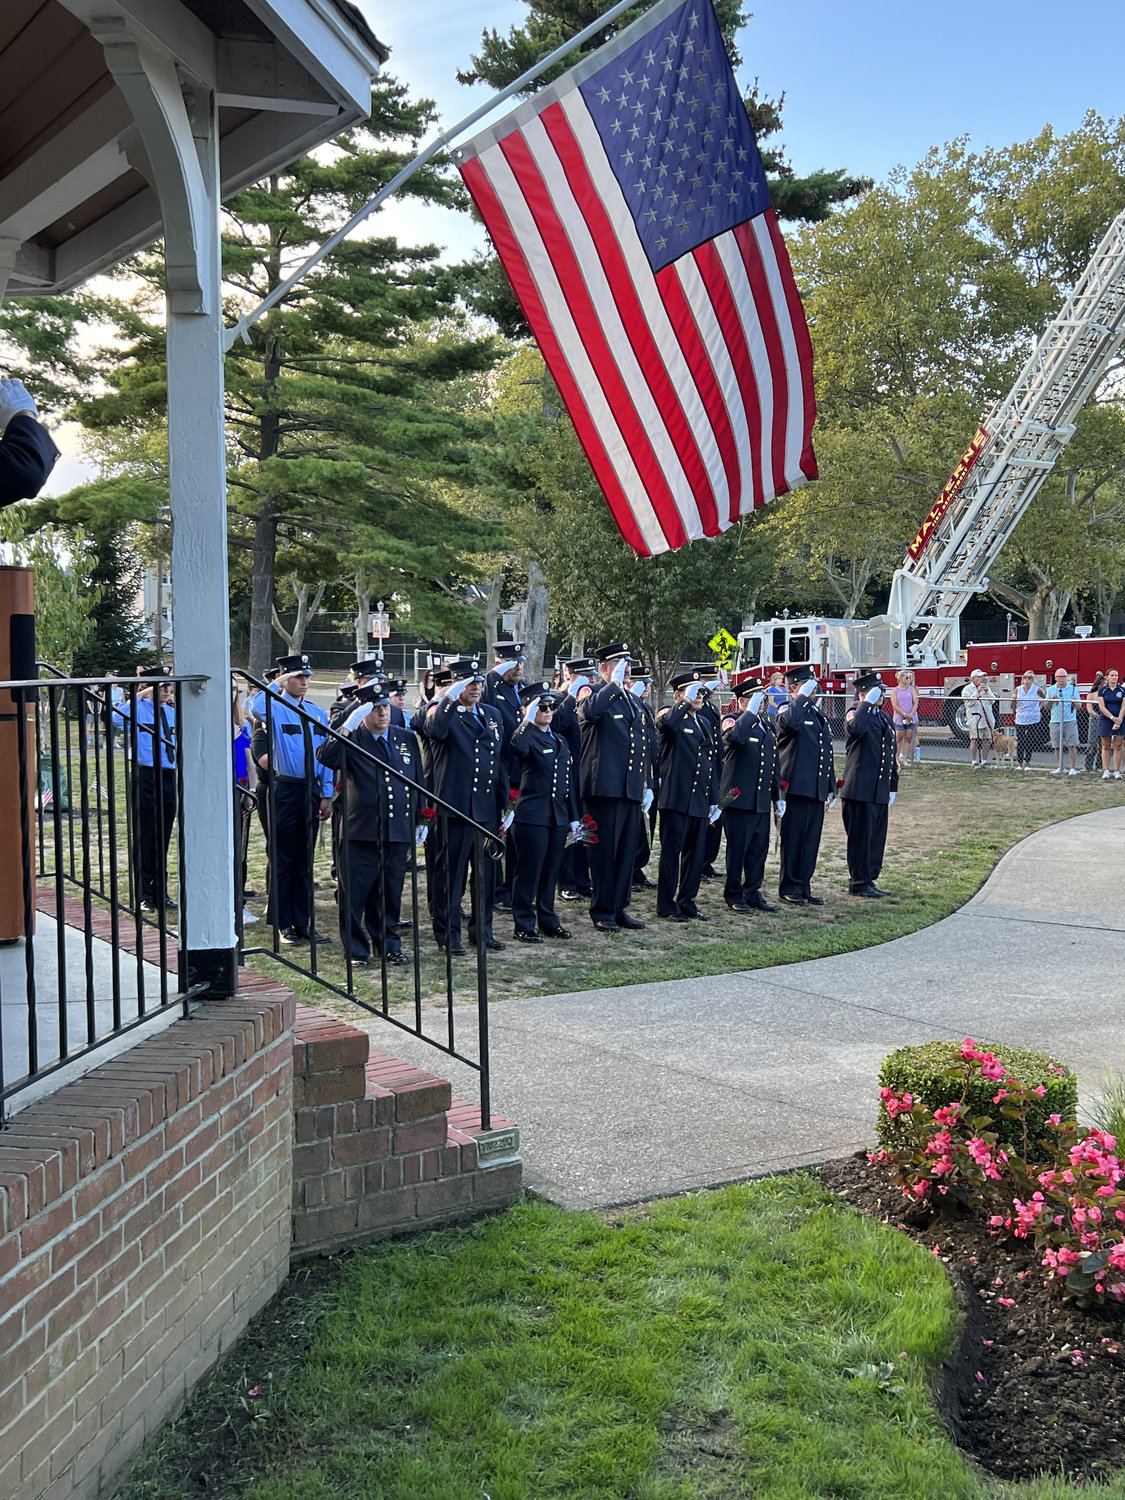 Firefighters from the Franklin Square & Munson Fire Department stood at attention during the 9/11 memorial service last Saturday across from Rath Park.